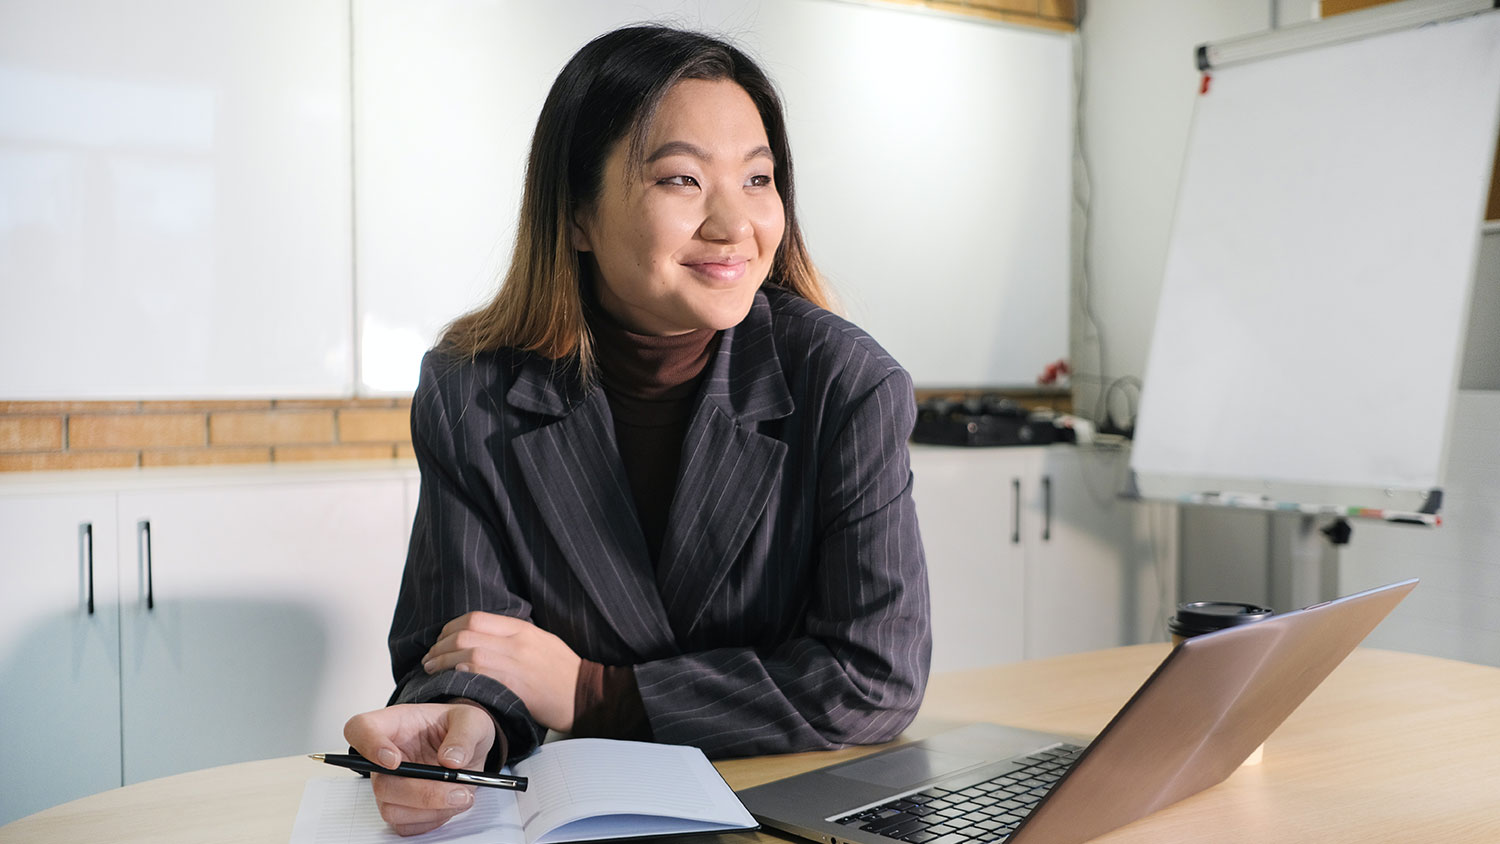 Smiling Asian woman in an office with computer